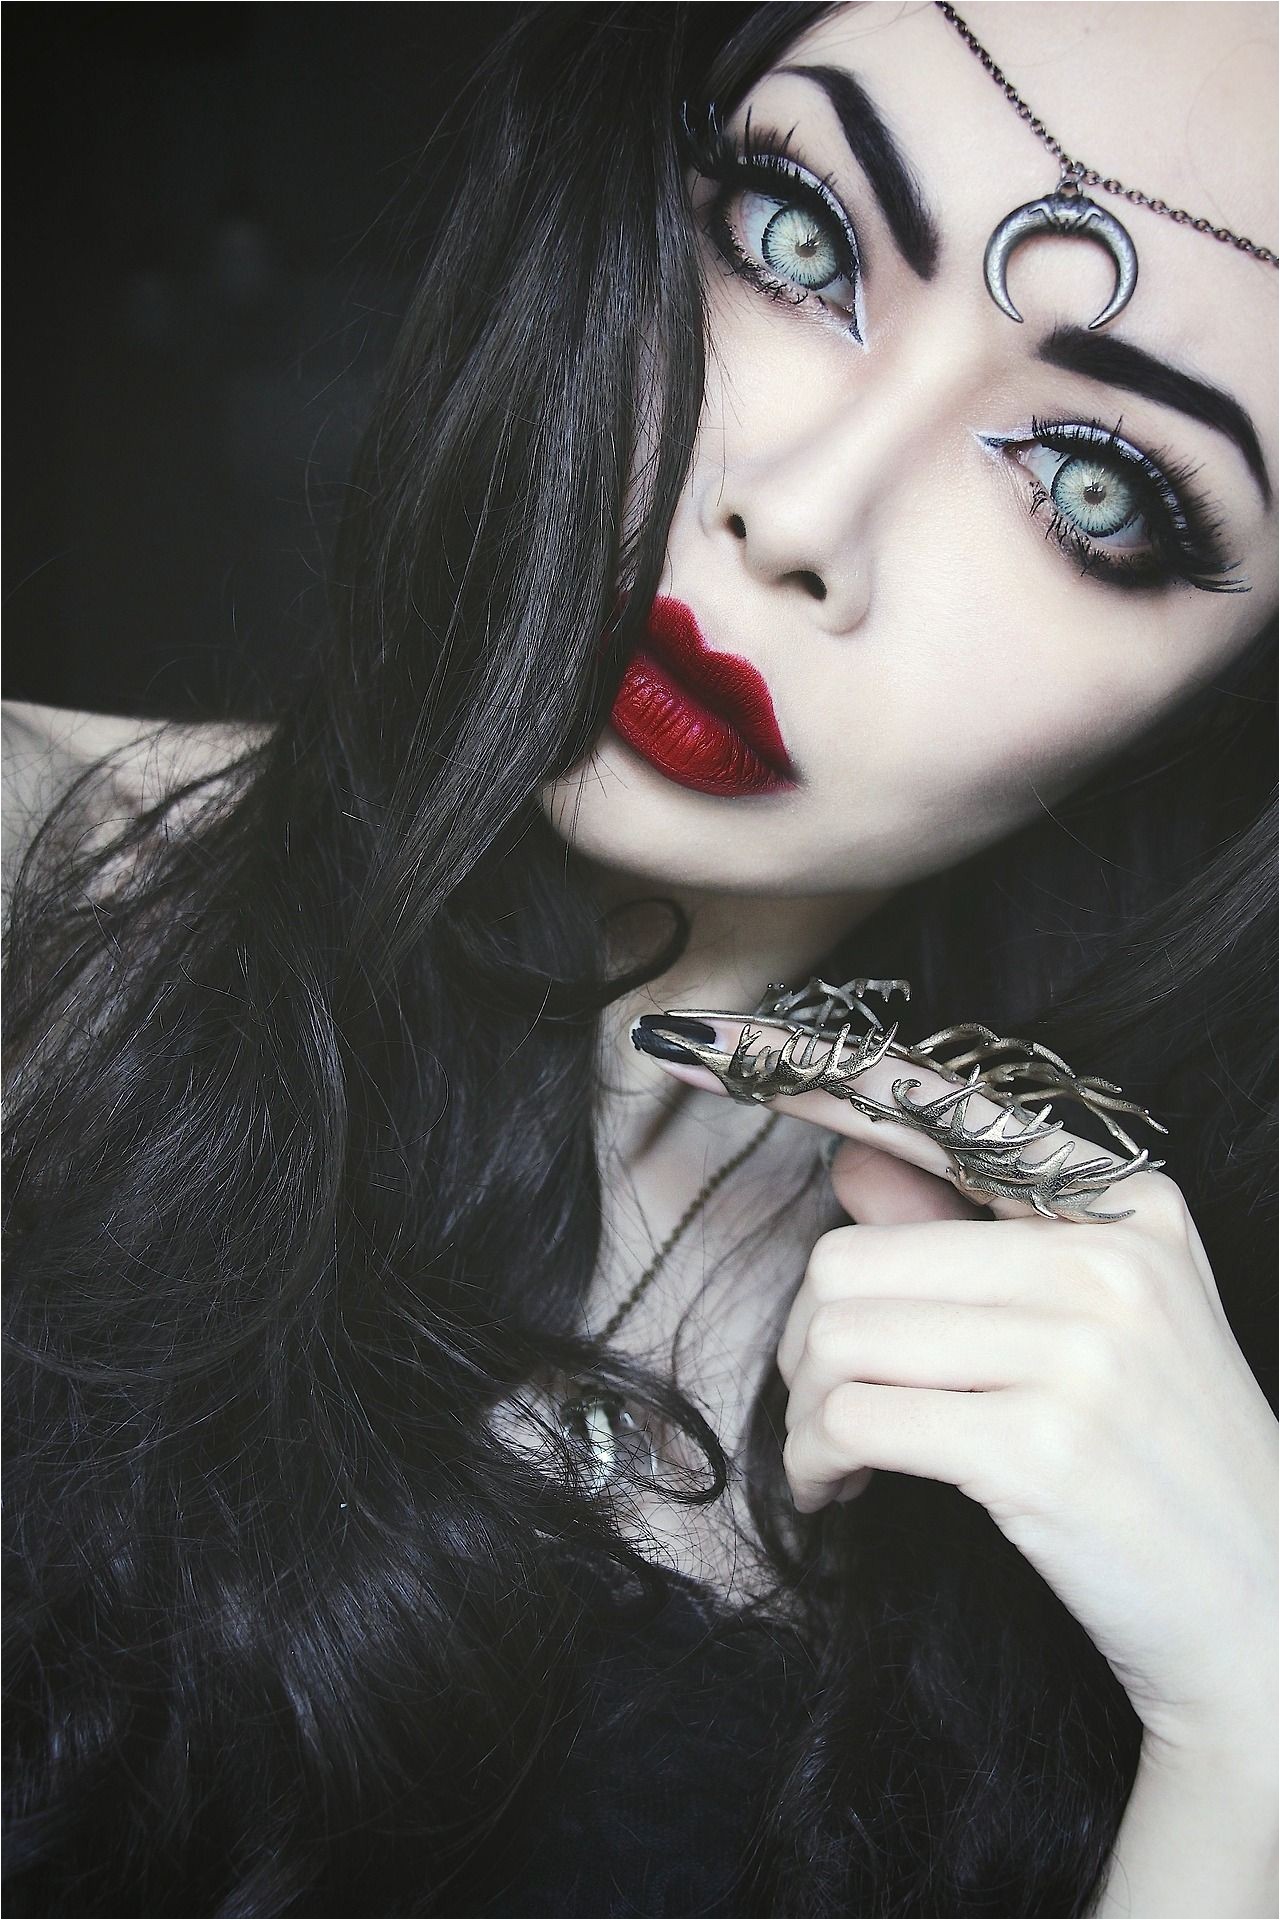 Another gothic makeup very bold features the eyes capture you massively along with the red bold lips and its amazing black hair